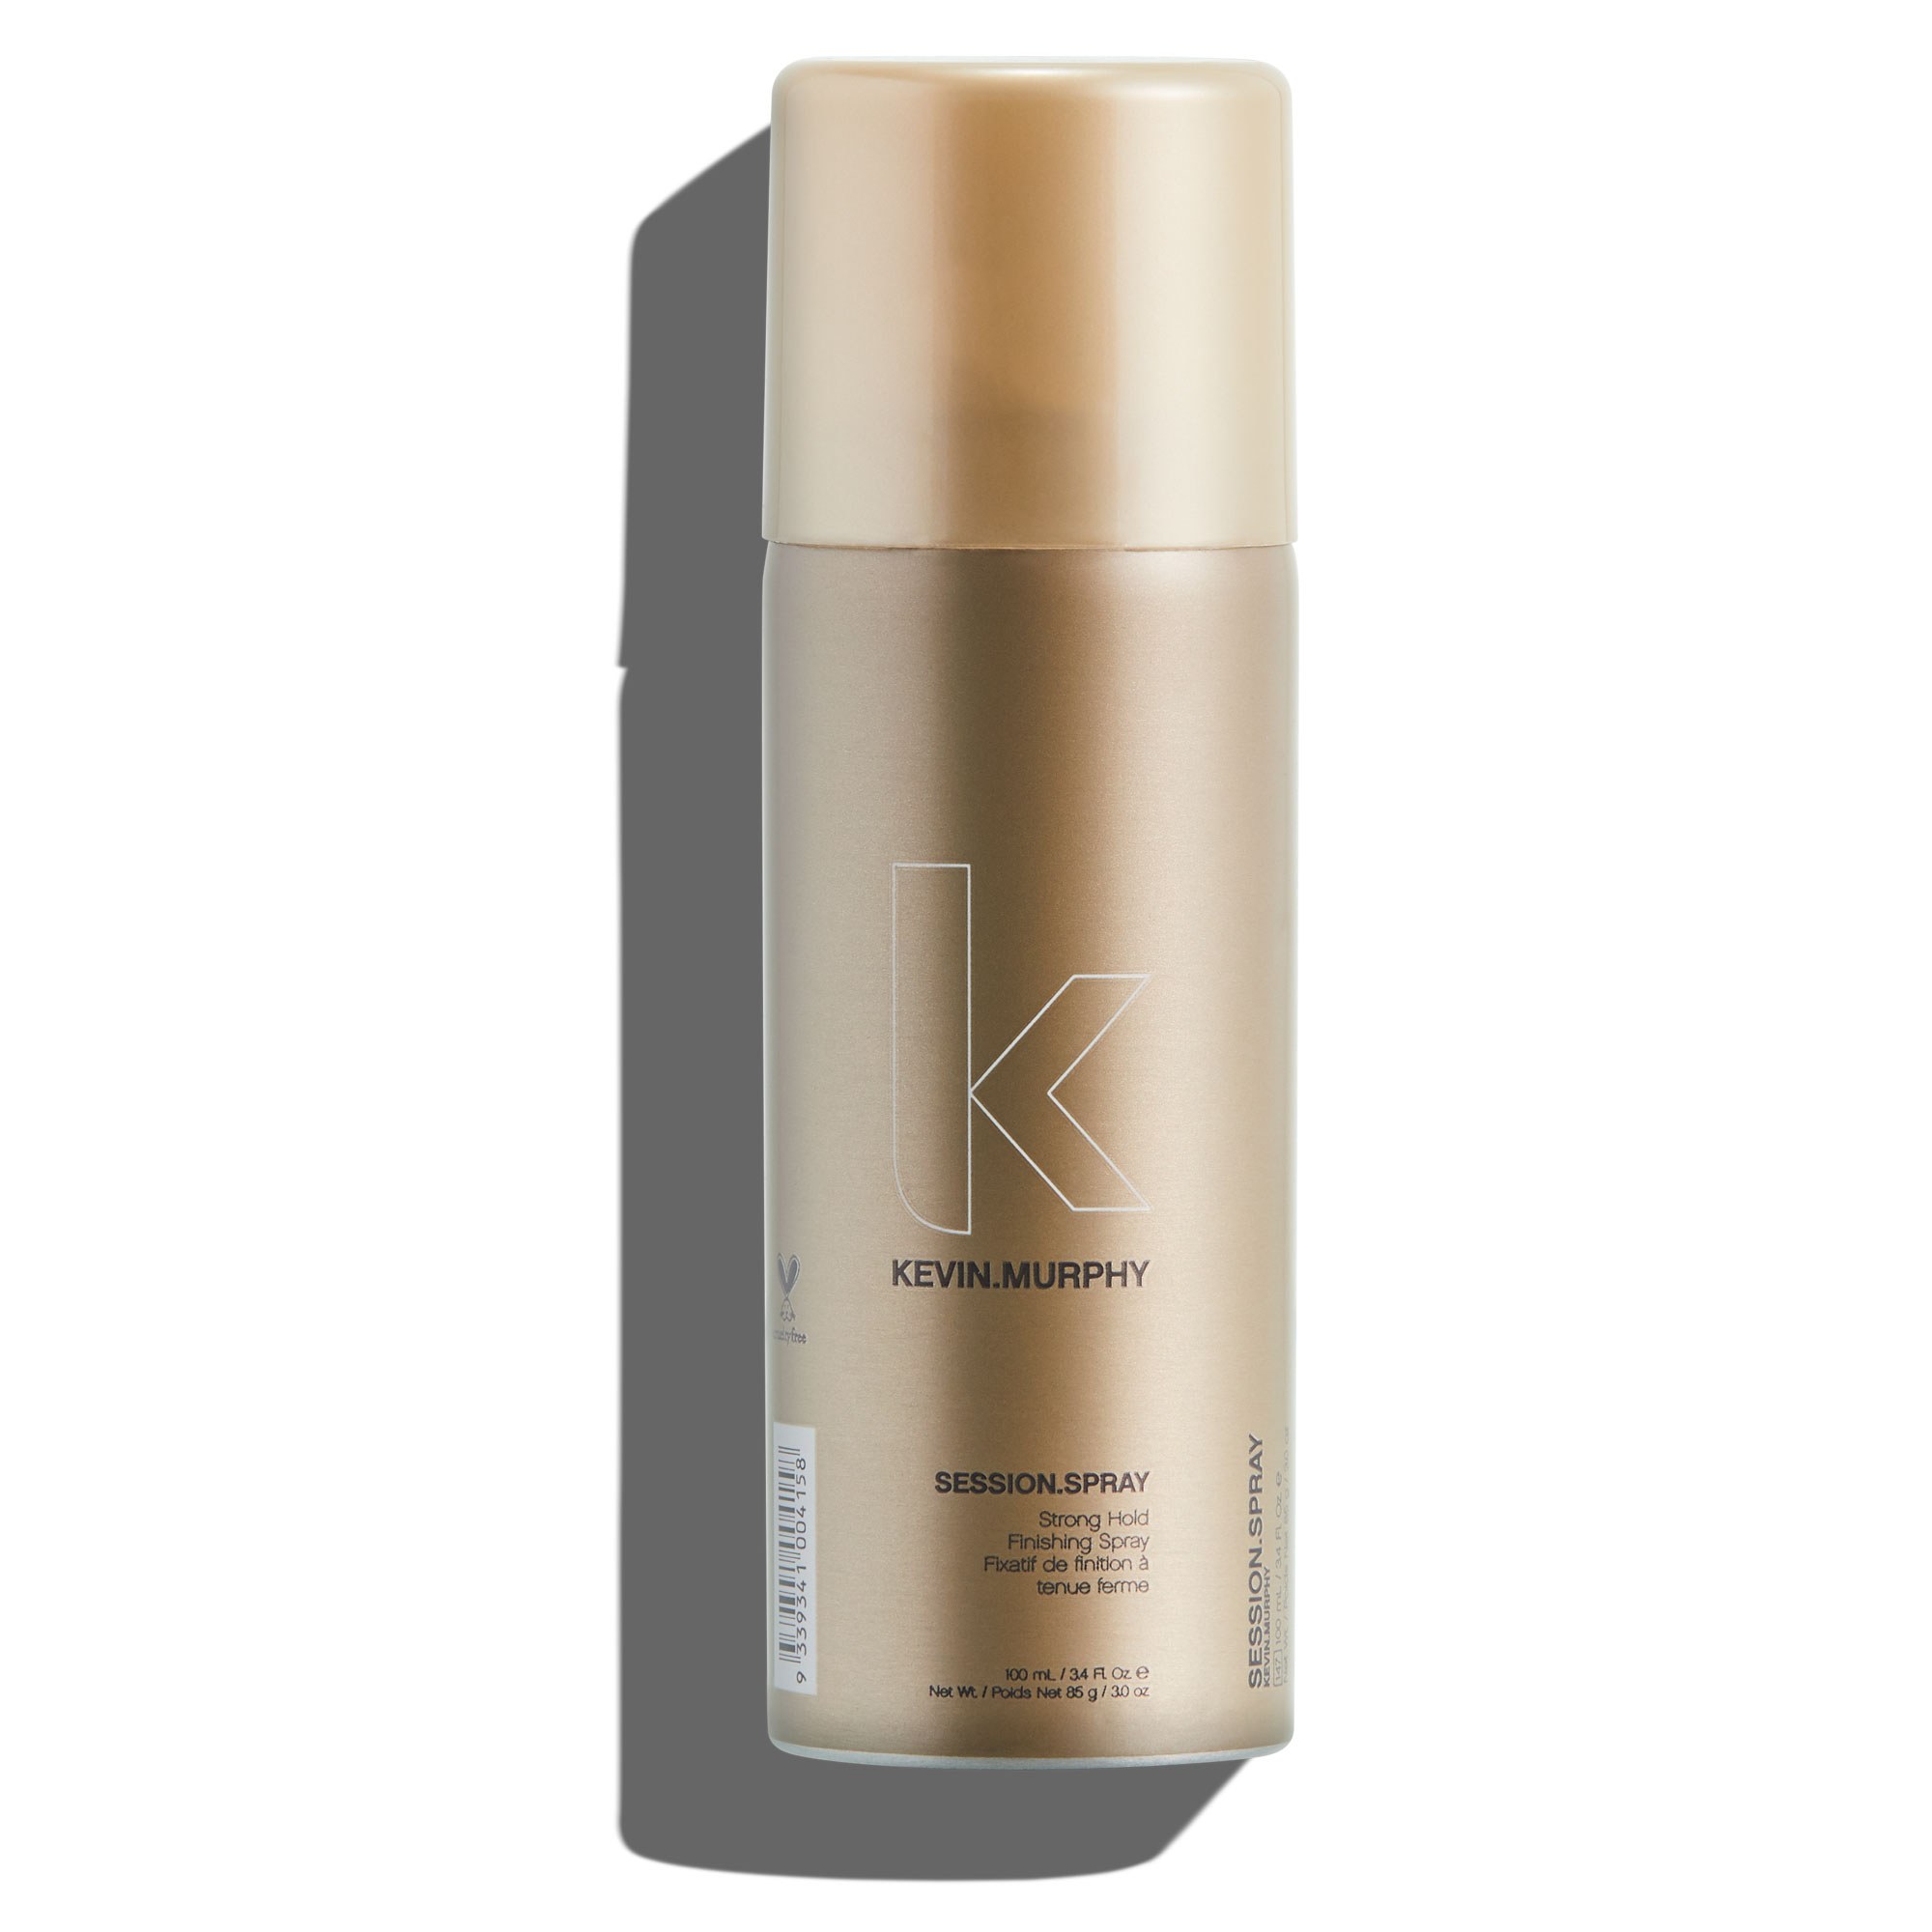 KEVIN.MURPHY SESSION.SPRAY